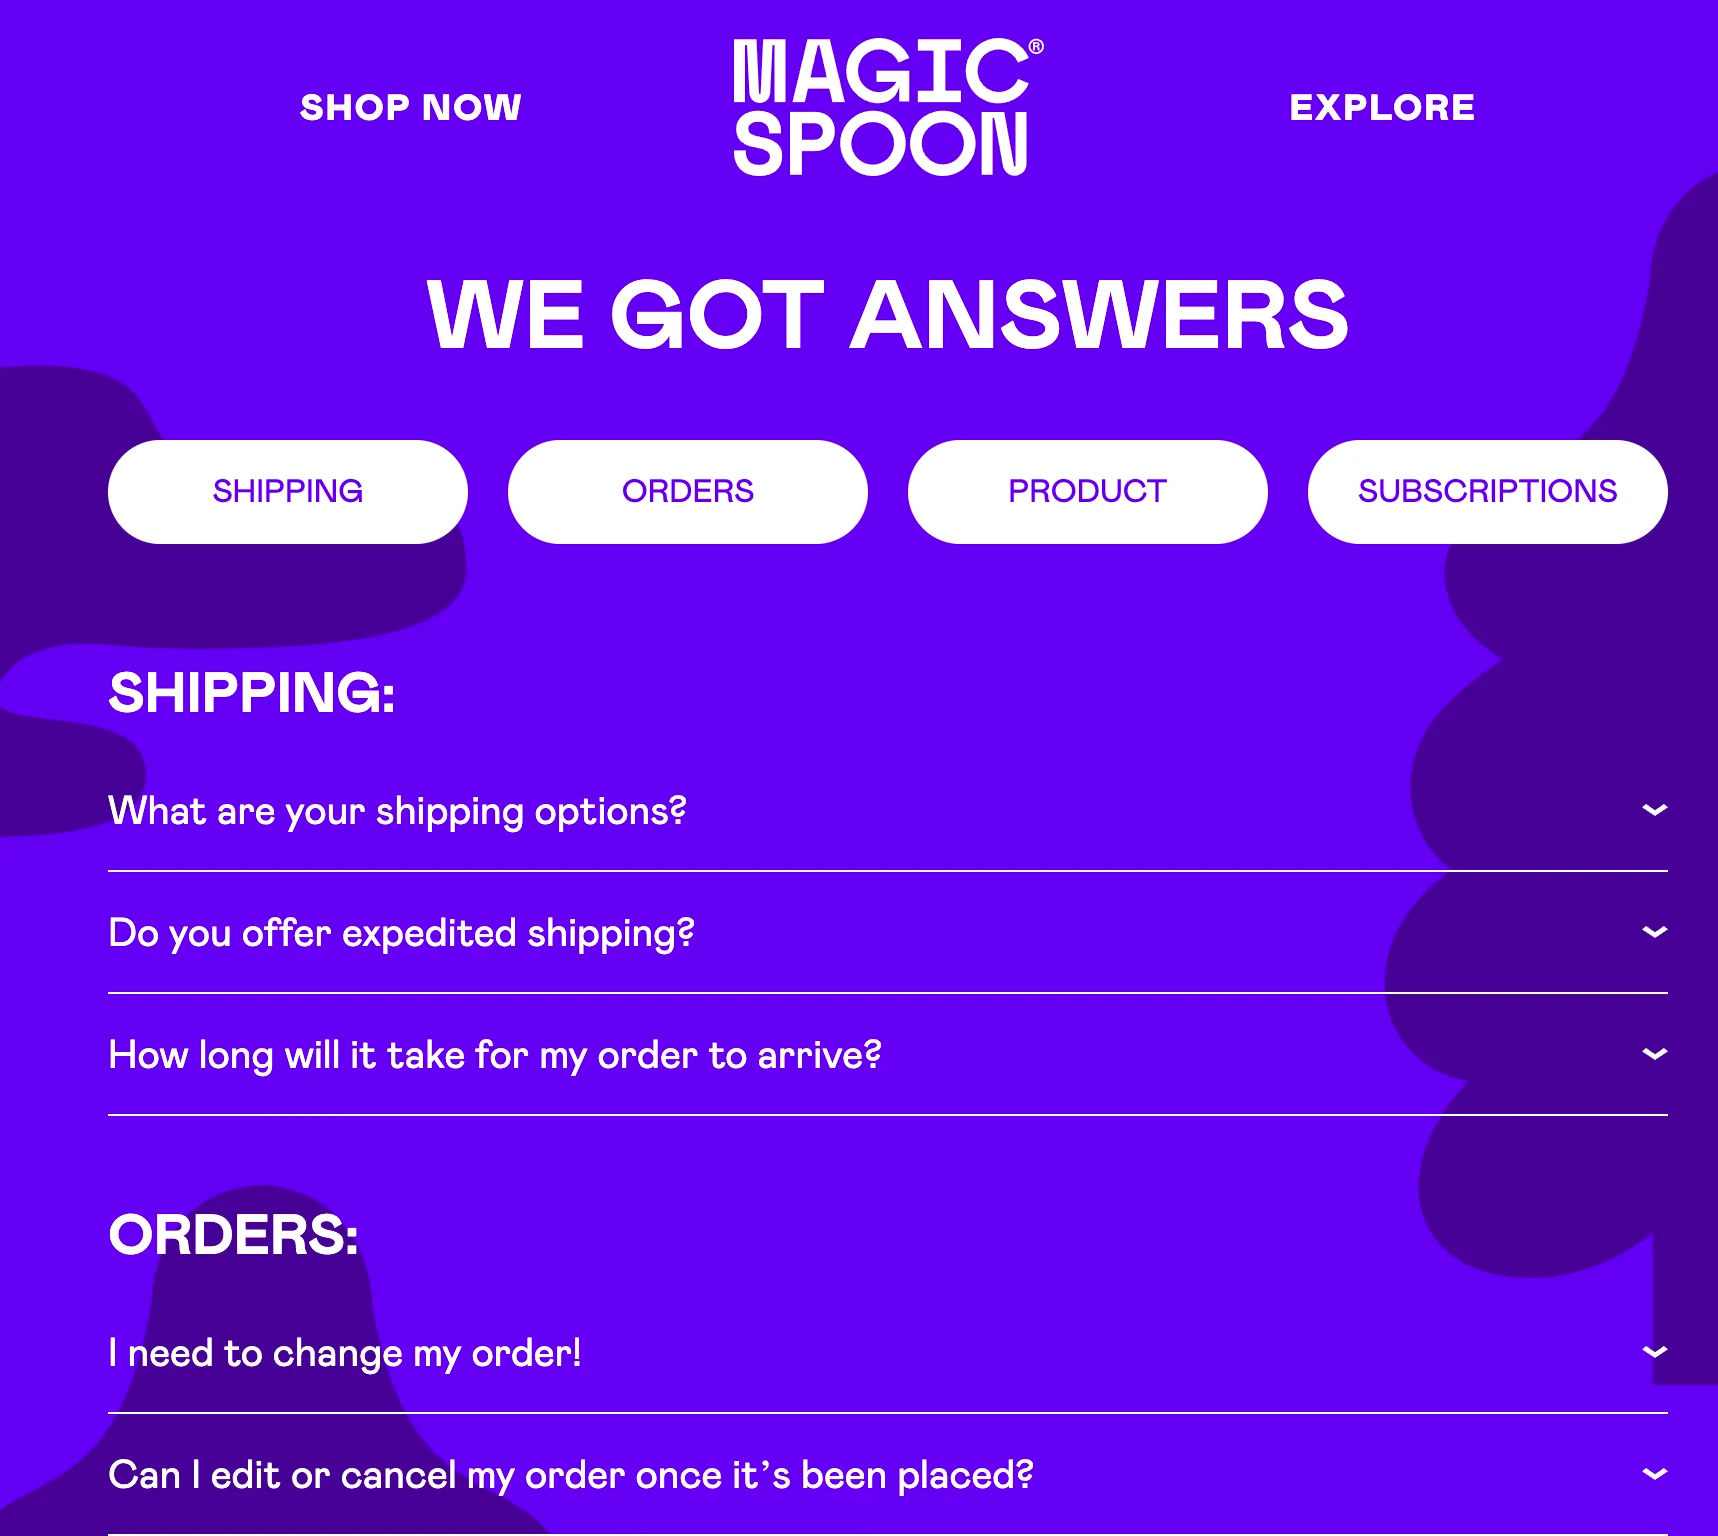 Magic Spoon’s FAQ page with subcategories addressing shipping, orders, product, and subscriptions.